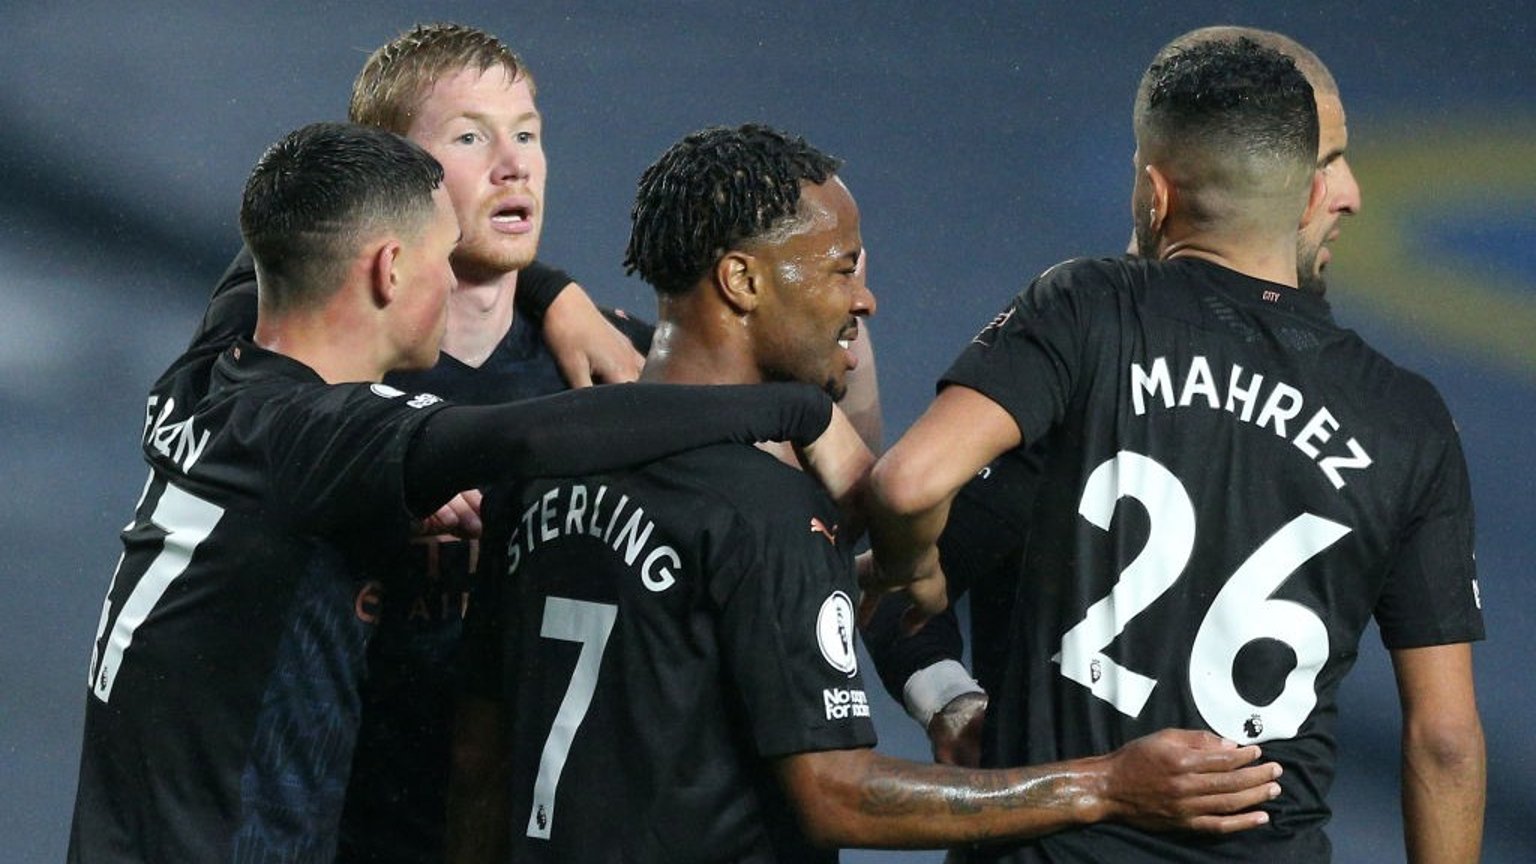 BRIGHT START: The lads congratulate Raheem after he opens the scoring